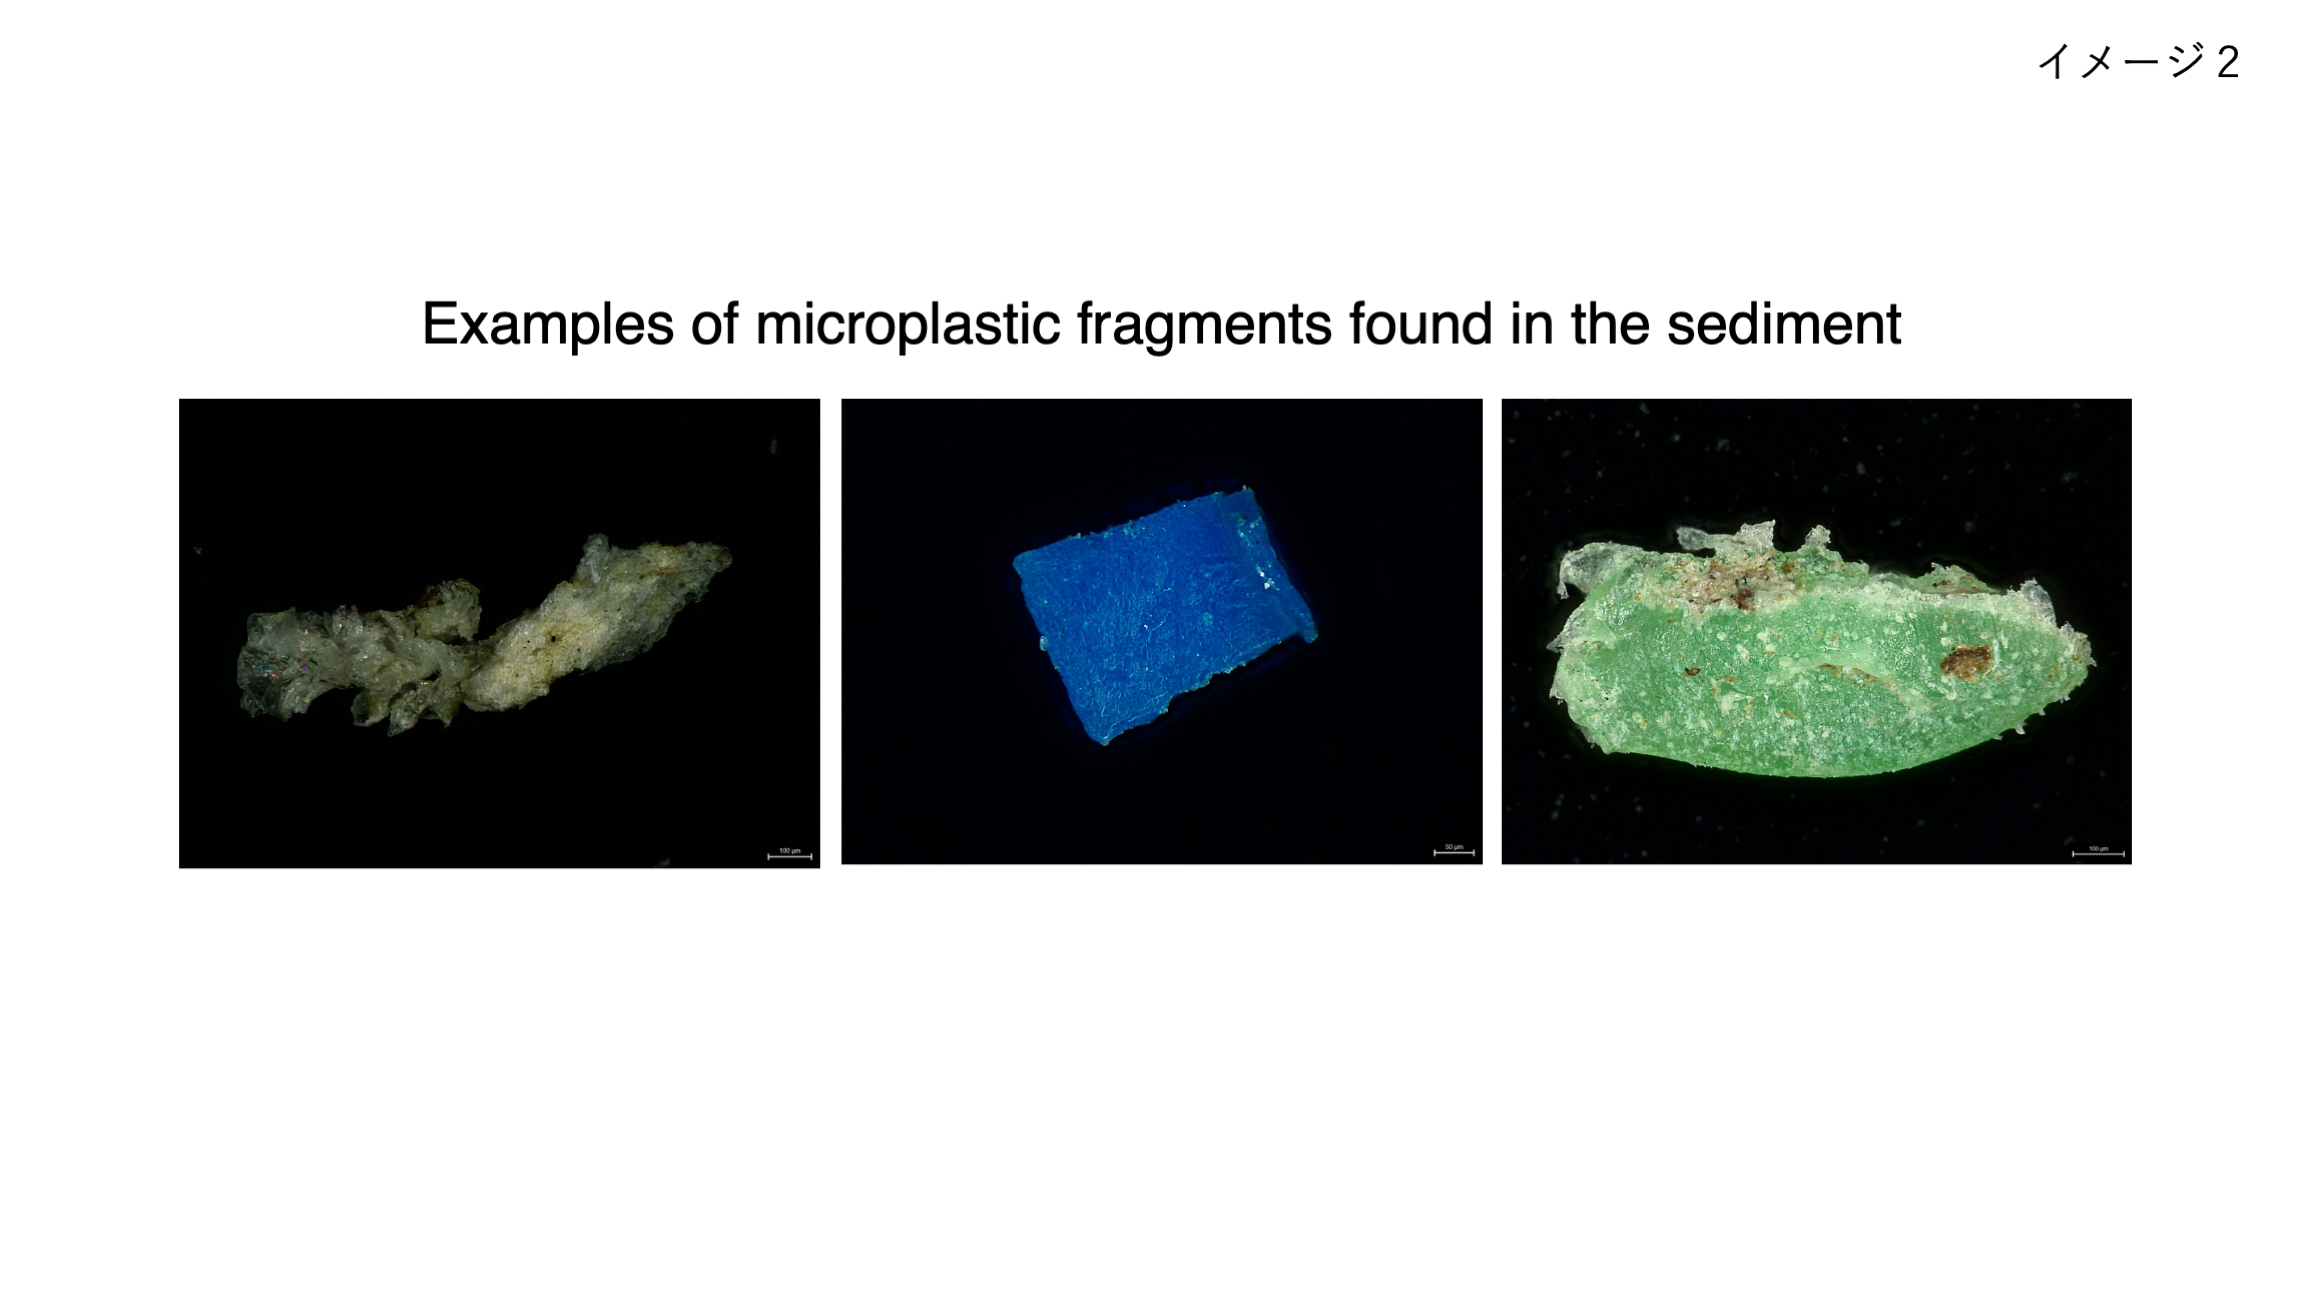 Samples of microplastics from the sediments